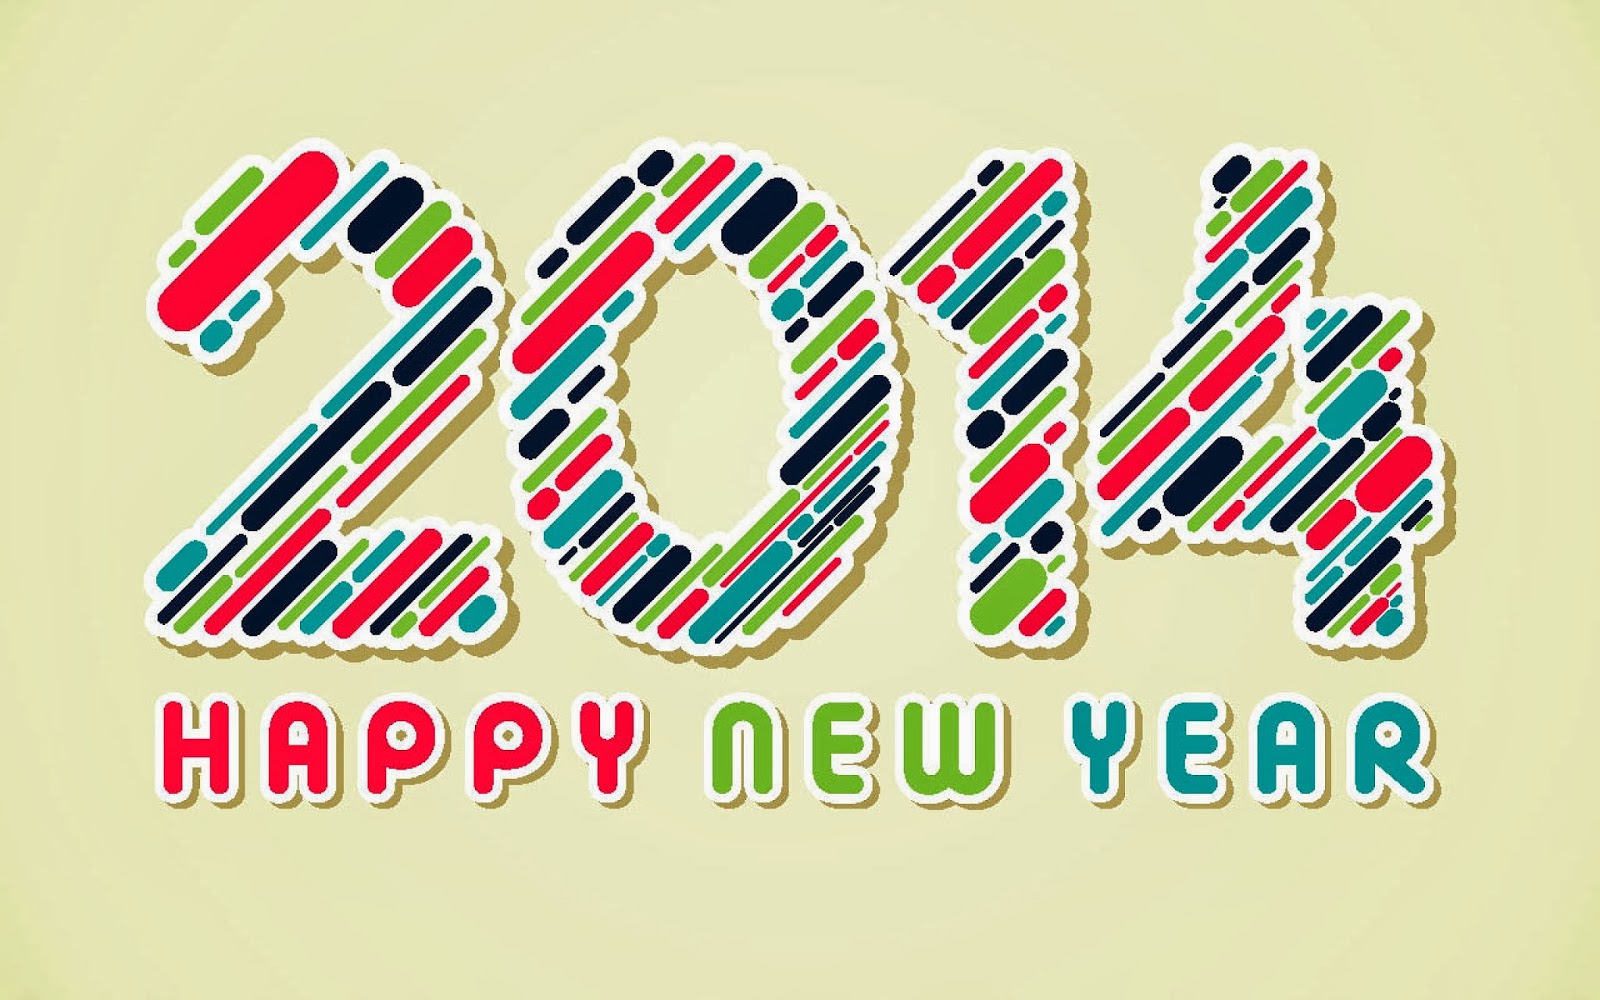 Happy New Years 2014 Clip Art Images  Pictures - Becuo